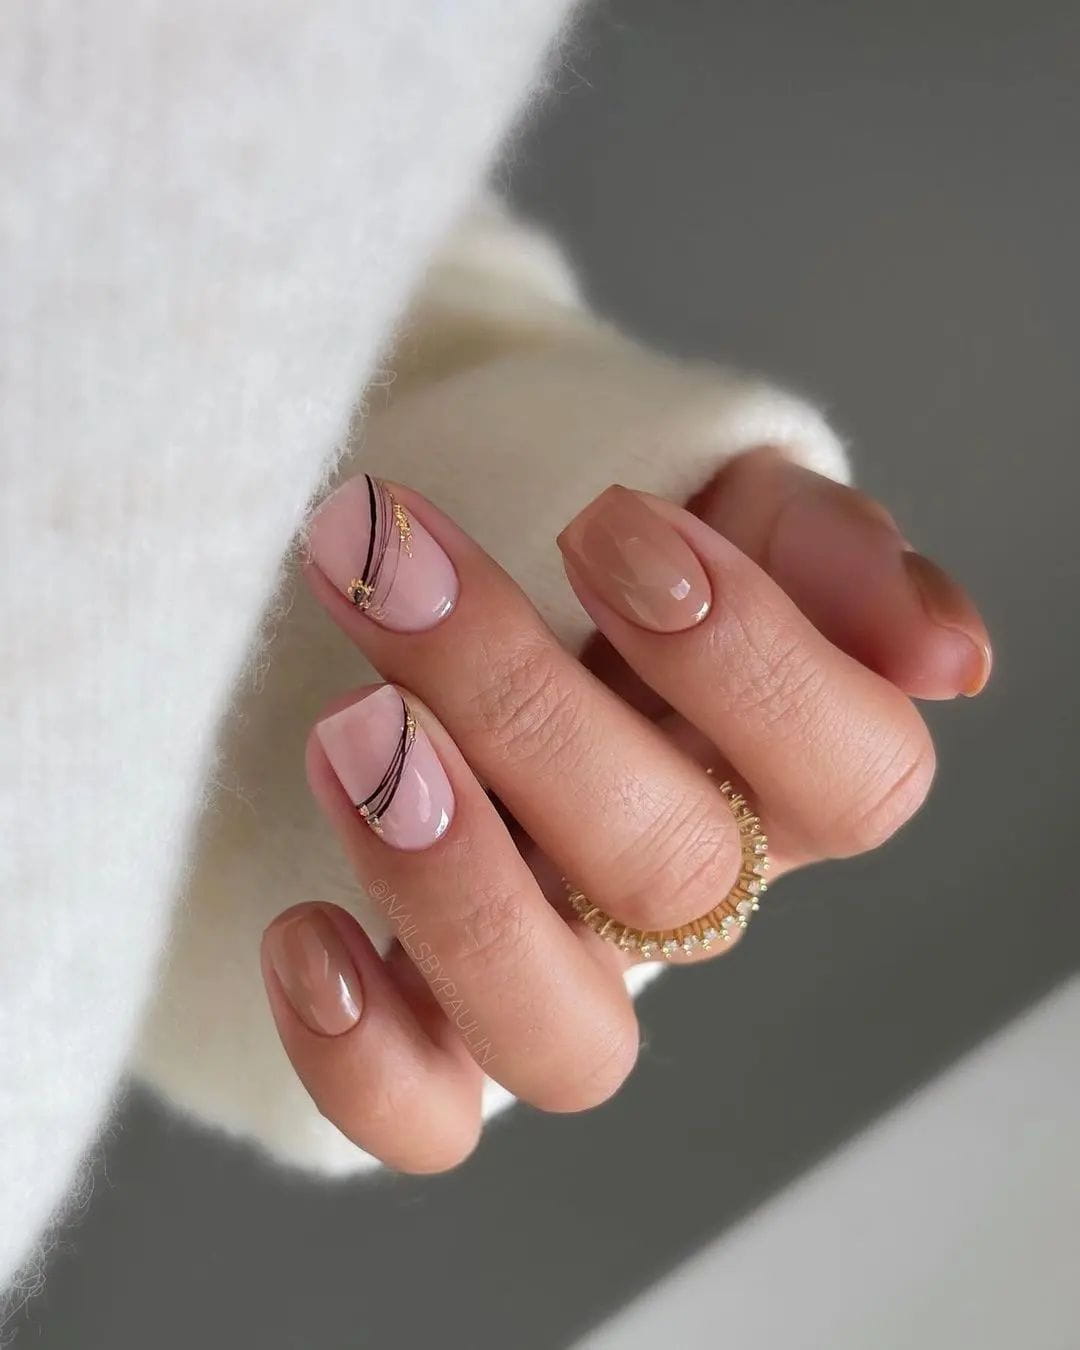 100+ Best Winter Nail Ideas And Designs To Try images 51